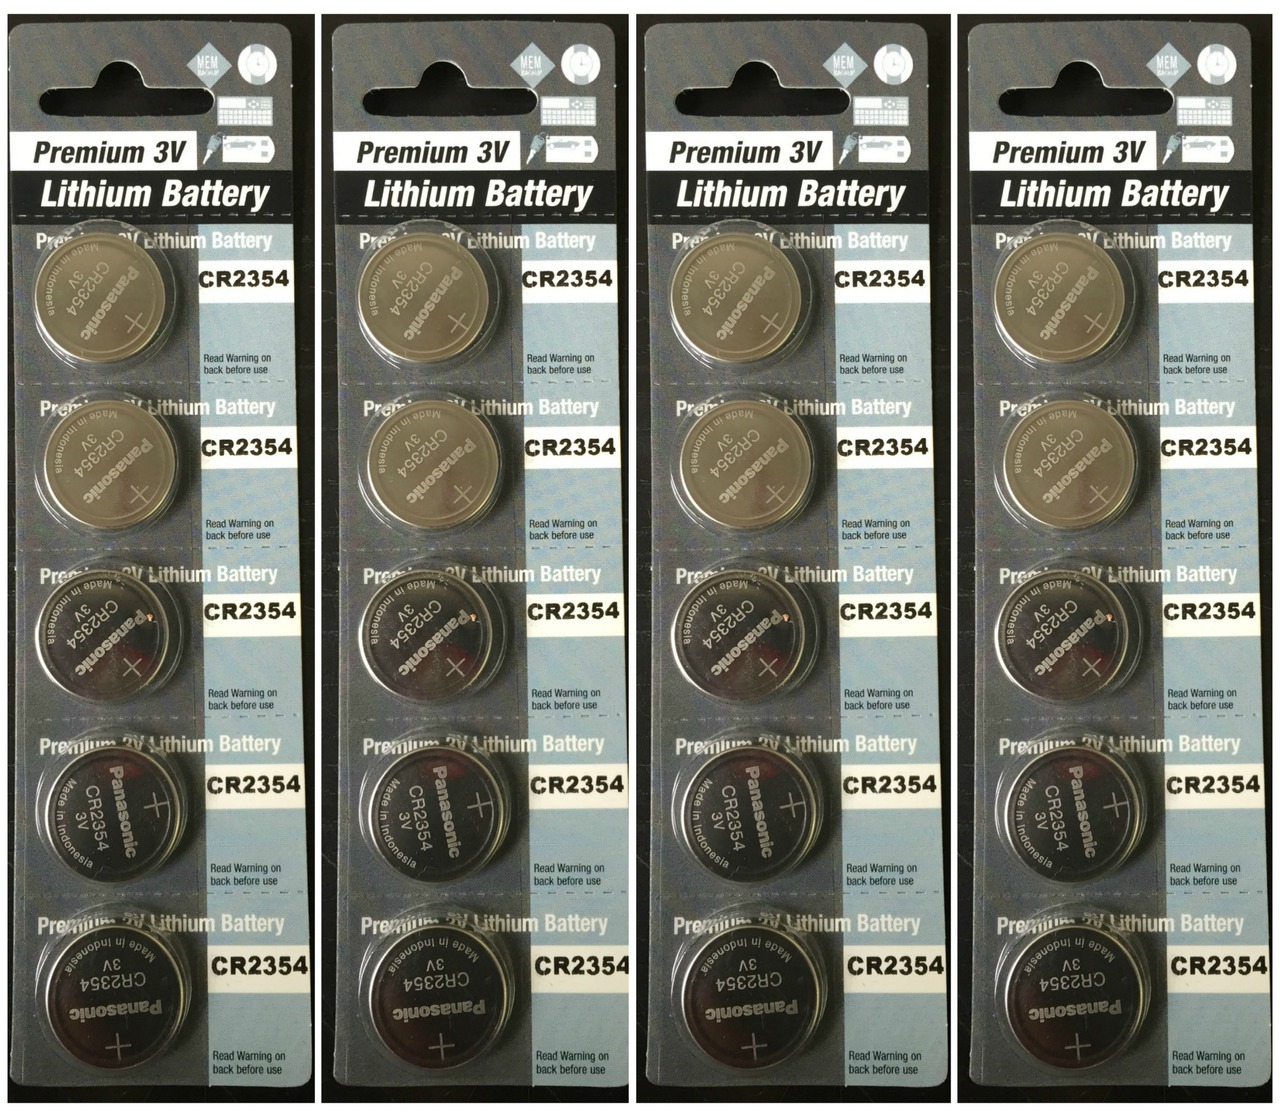 Panasonic CR2354 3V Lithium Coin Battery - 25 Pack +FREE SHIPPING!